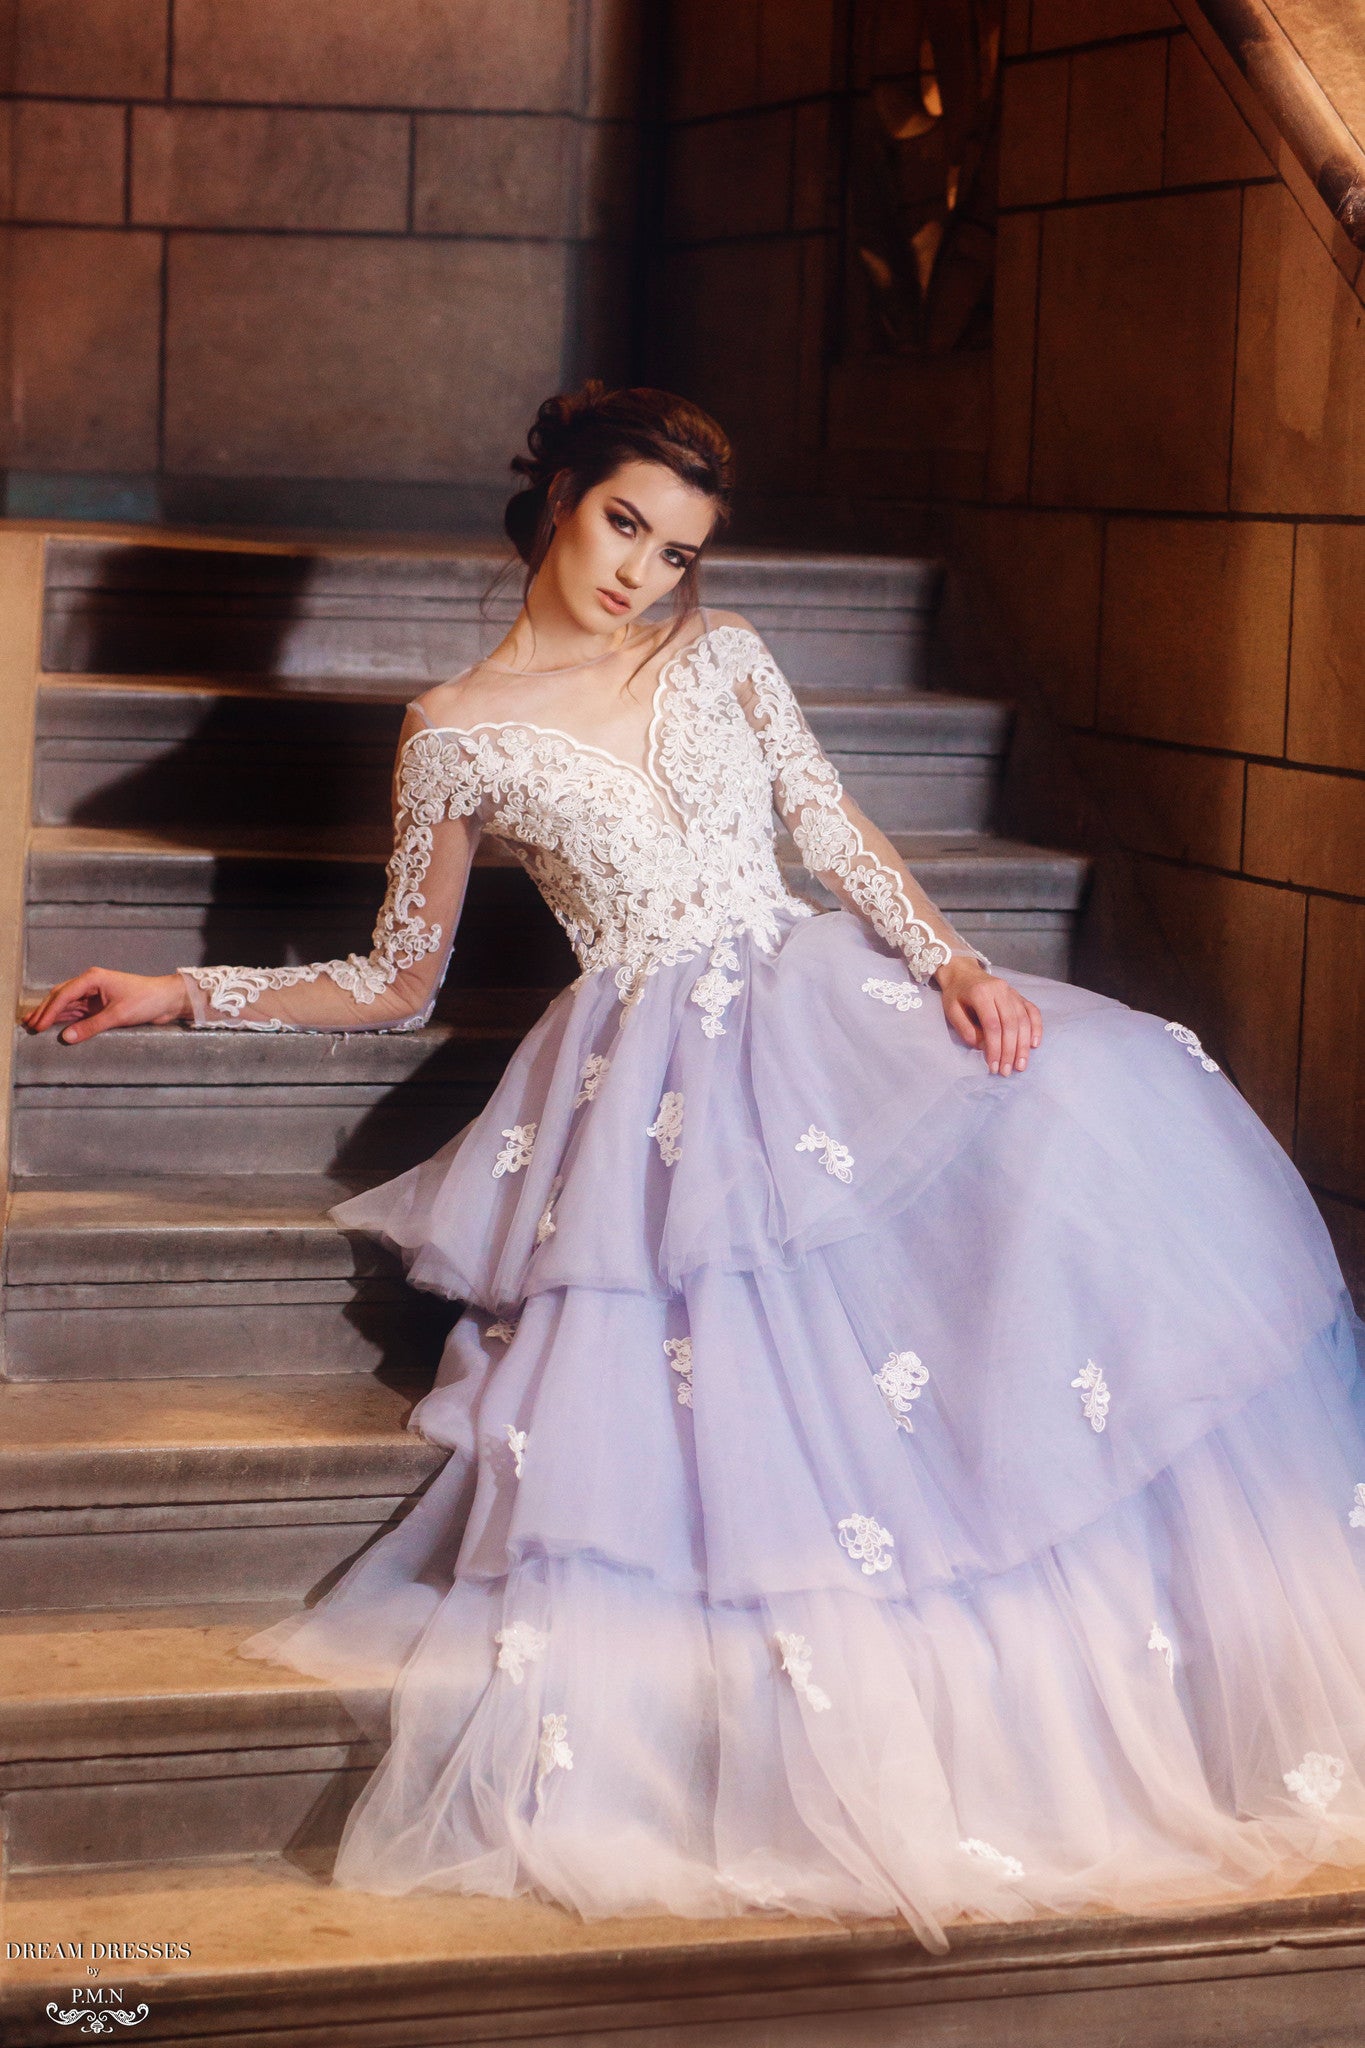 Tiered Tulle Ball Gown (#Cherilyn) | Dream Dresses by P.M.N.